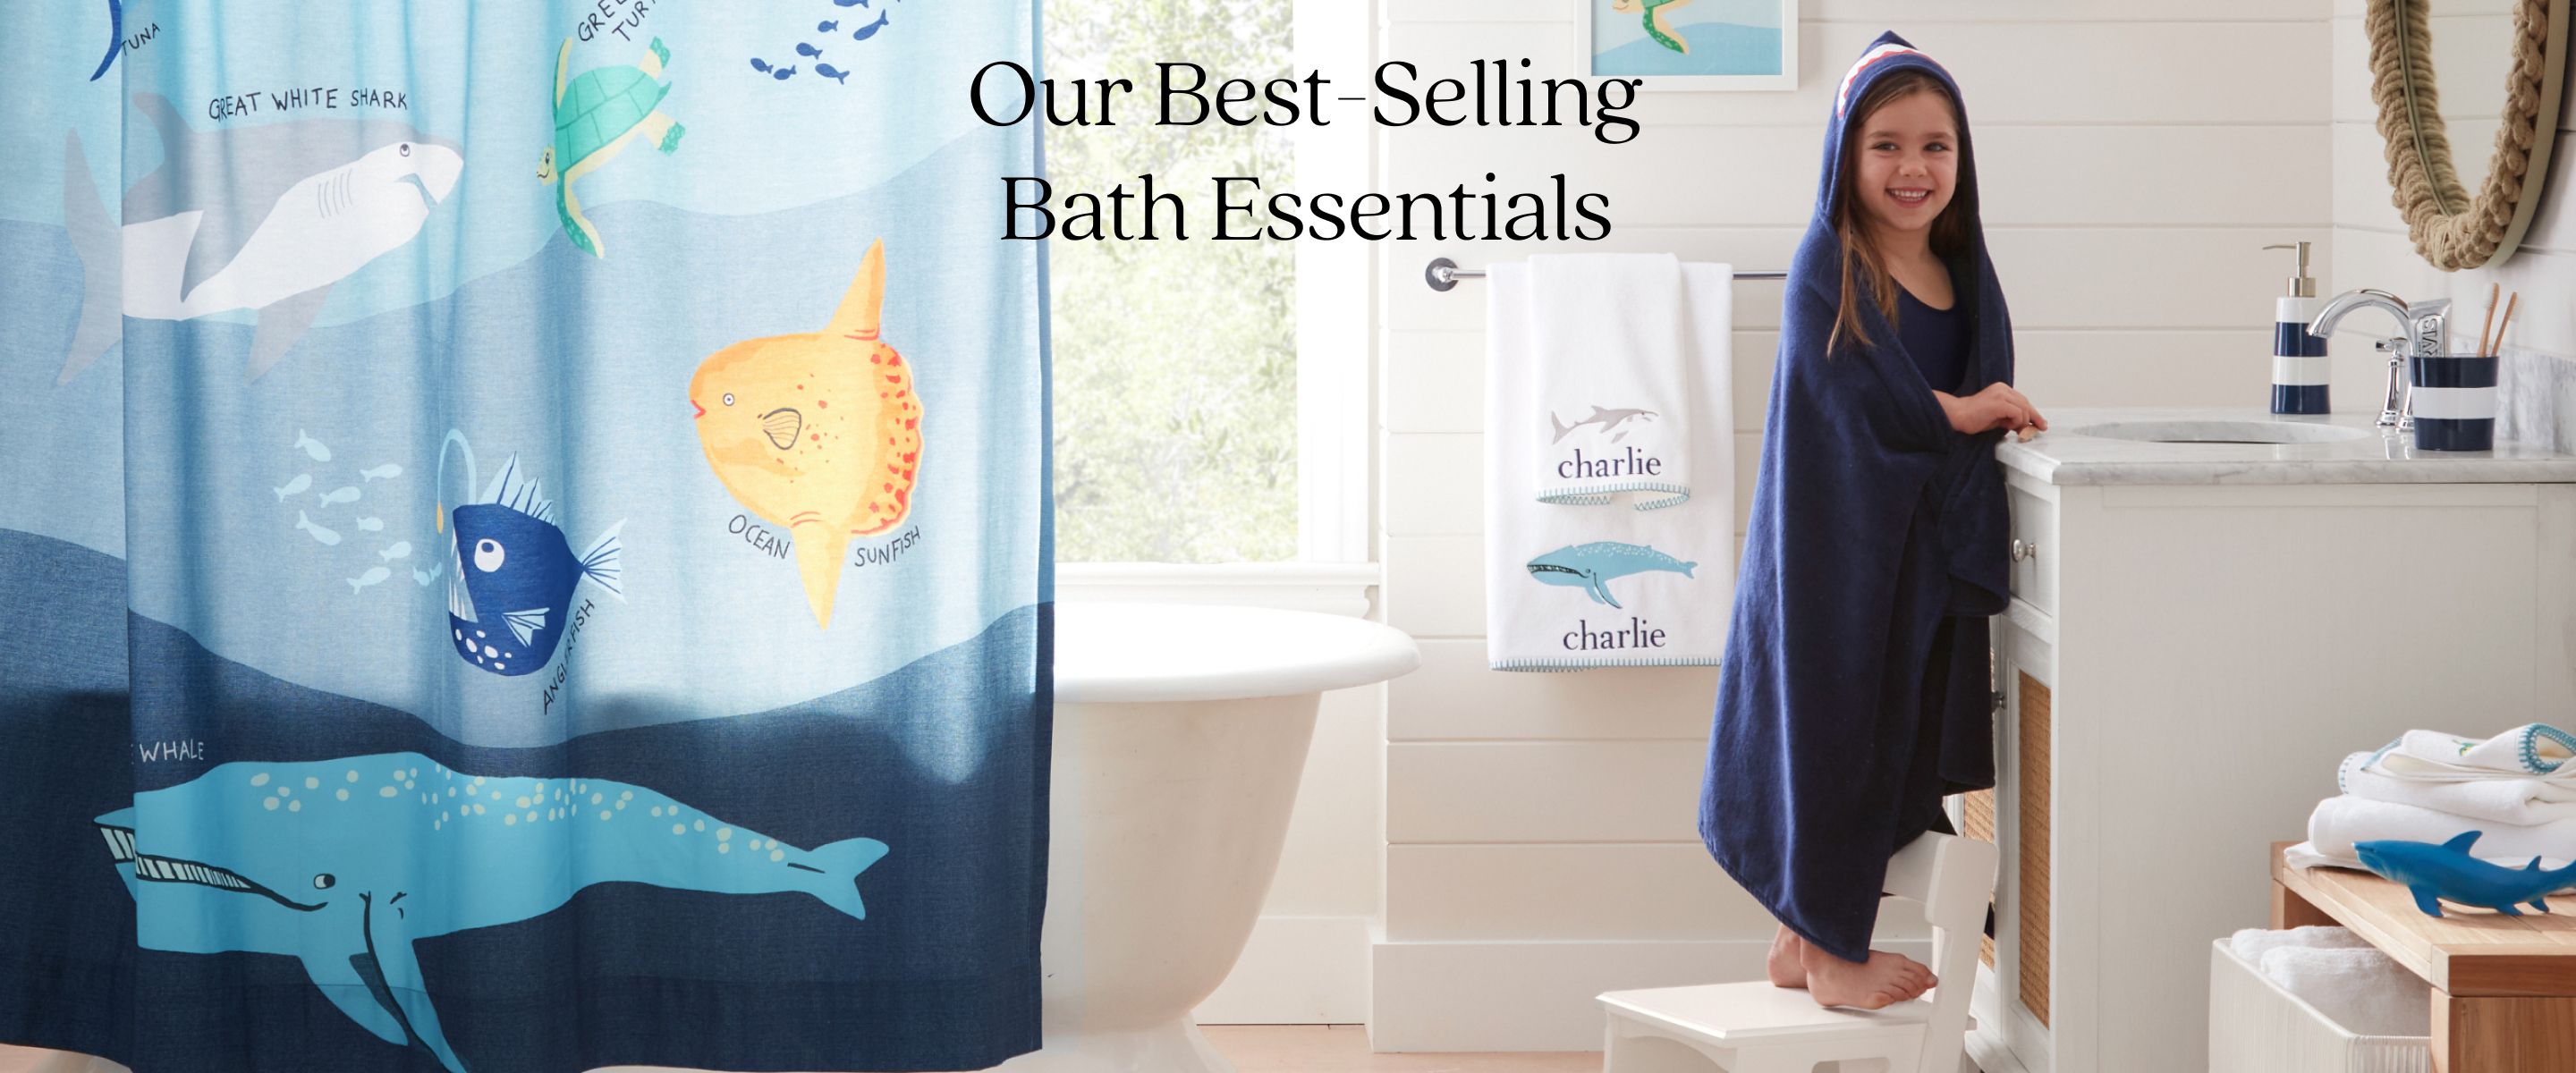 Our Best-Selling Bath Essentials